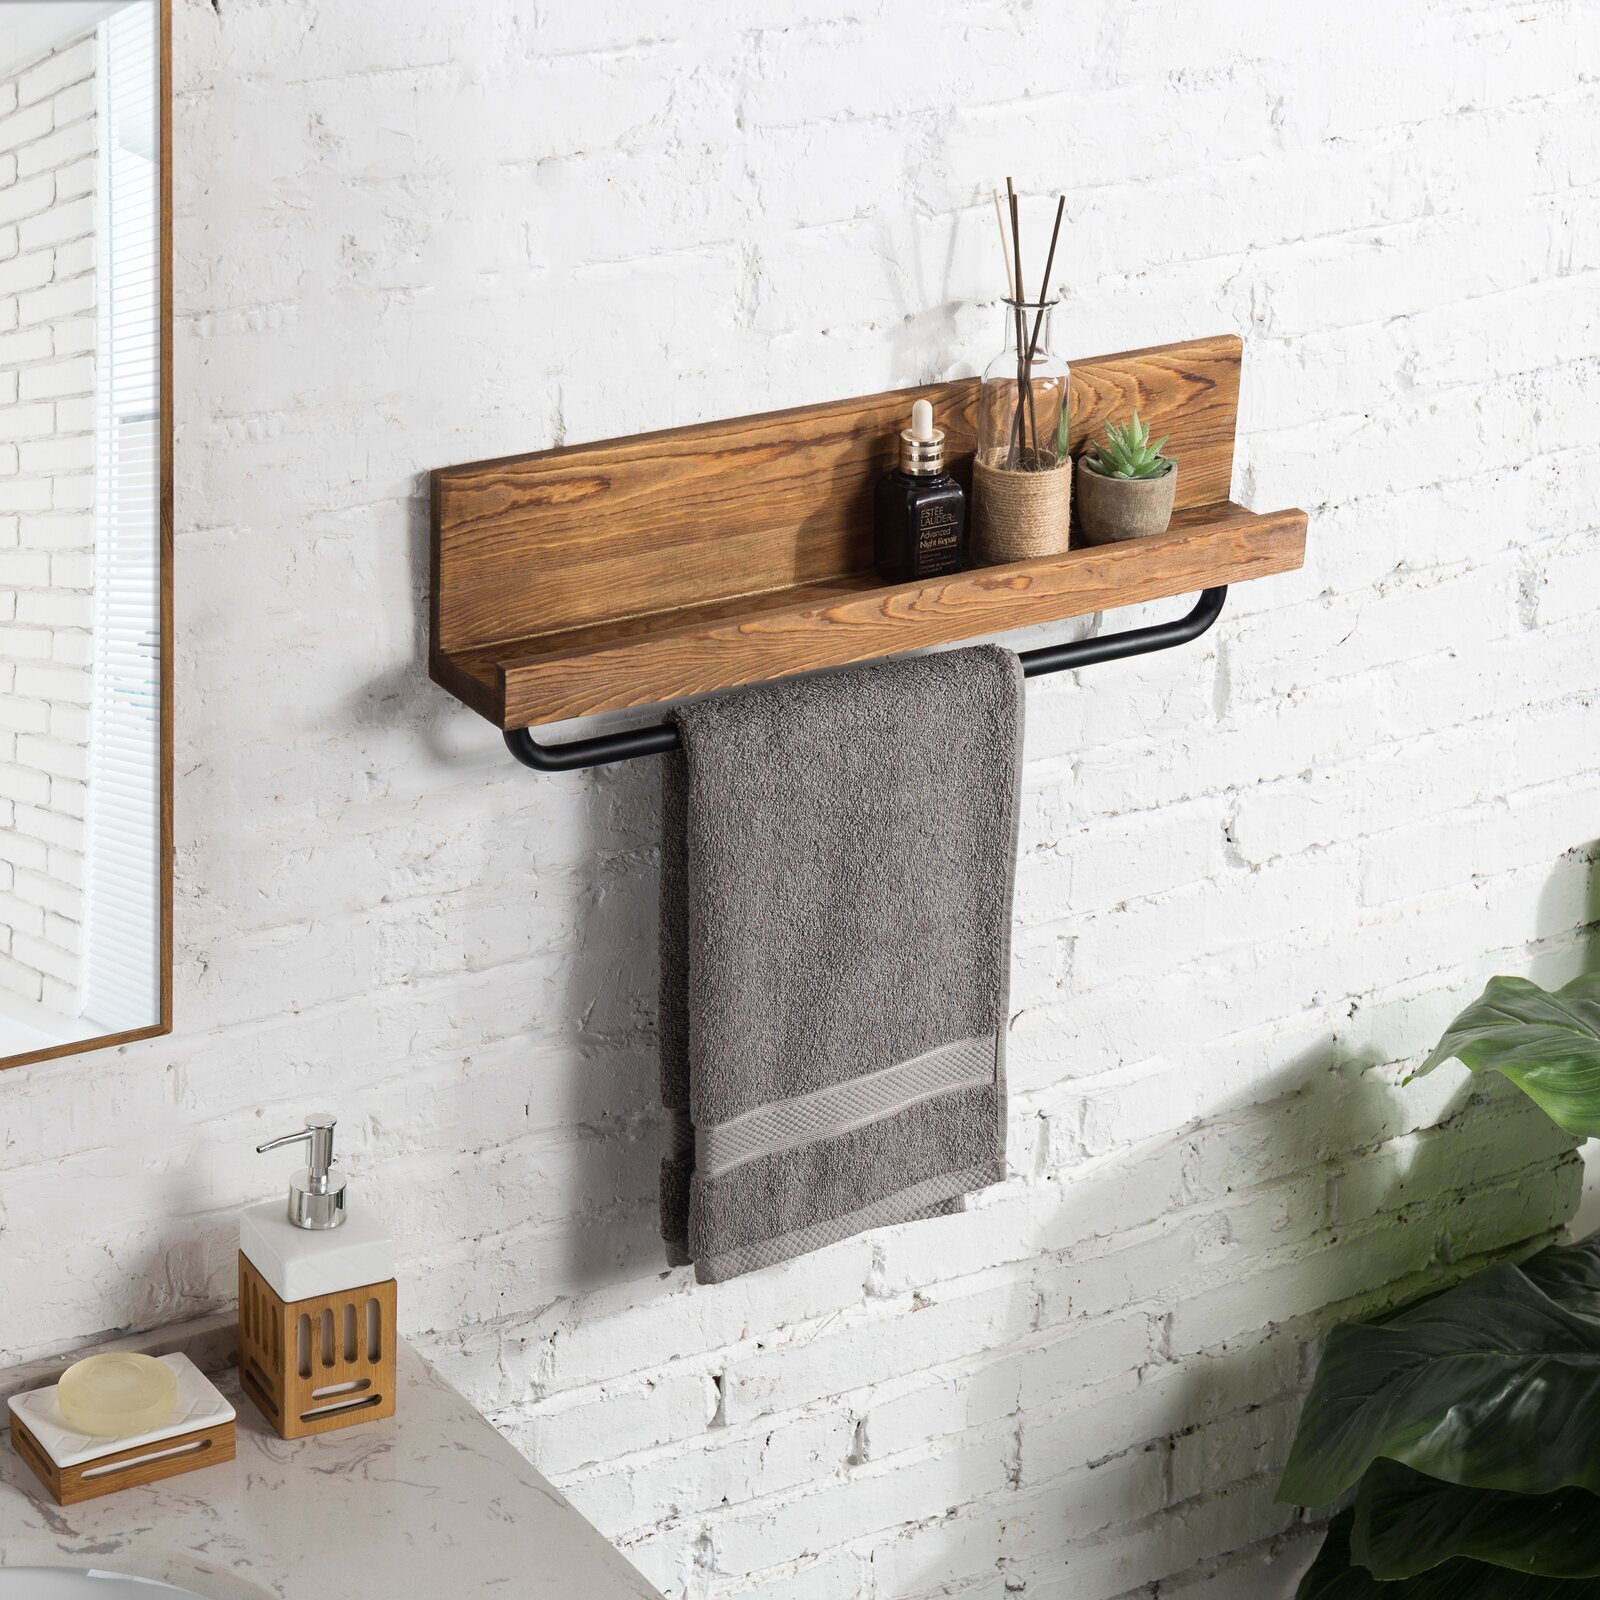 Space Saving Wall Mounted Wooden Shelf With Towel Rail